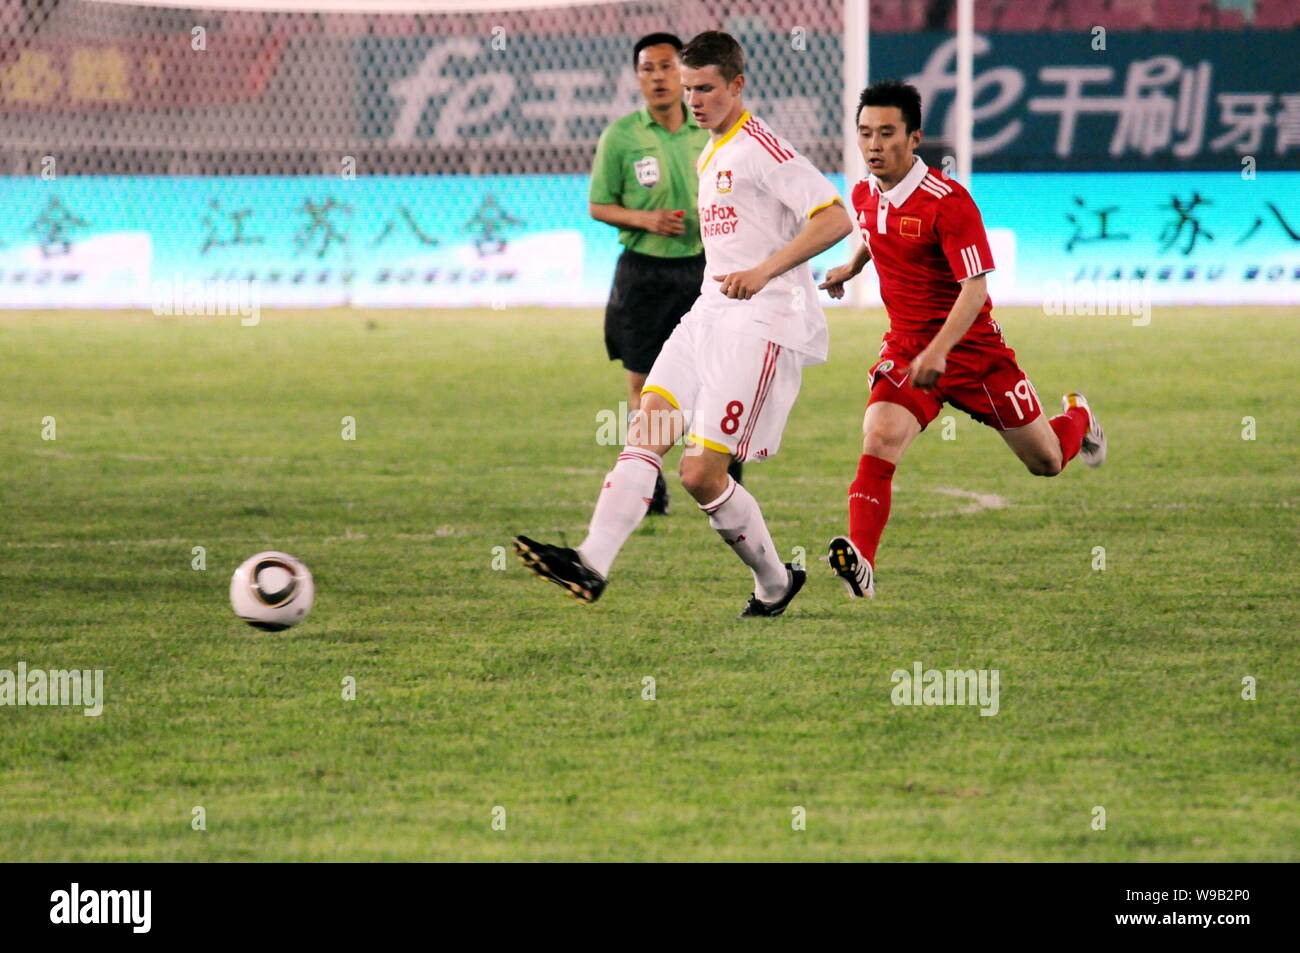 Yang Hao, right, of the Chinese national mens soccer team follows Lars Bender of Bayer 04 Leverkusen Football Club during a friendly soccer match in J Stock Photo